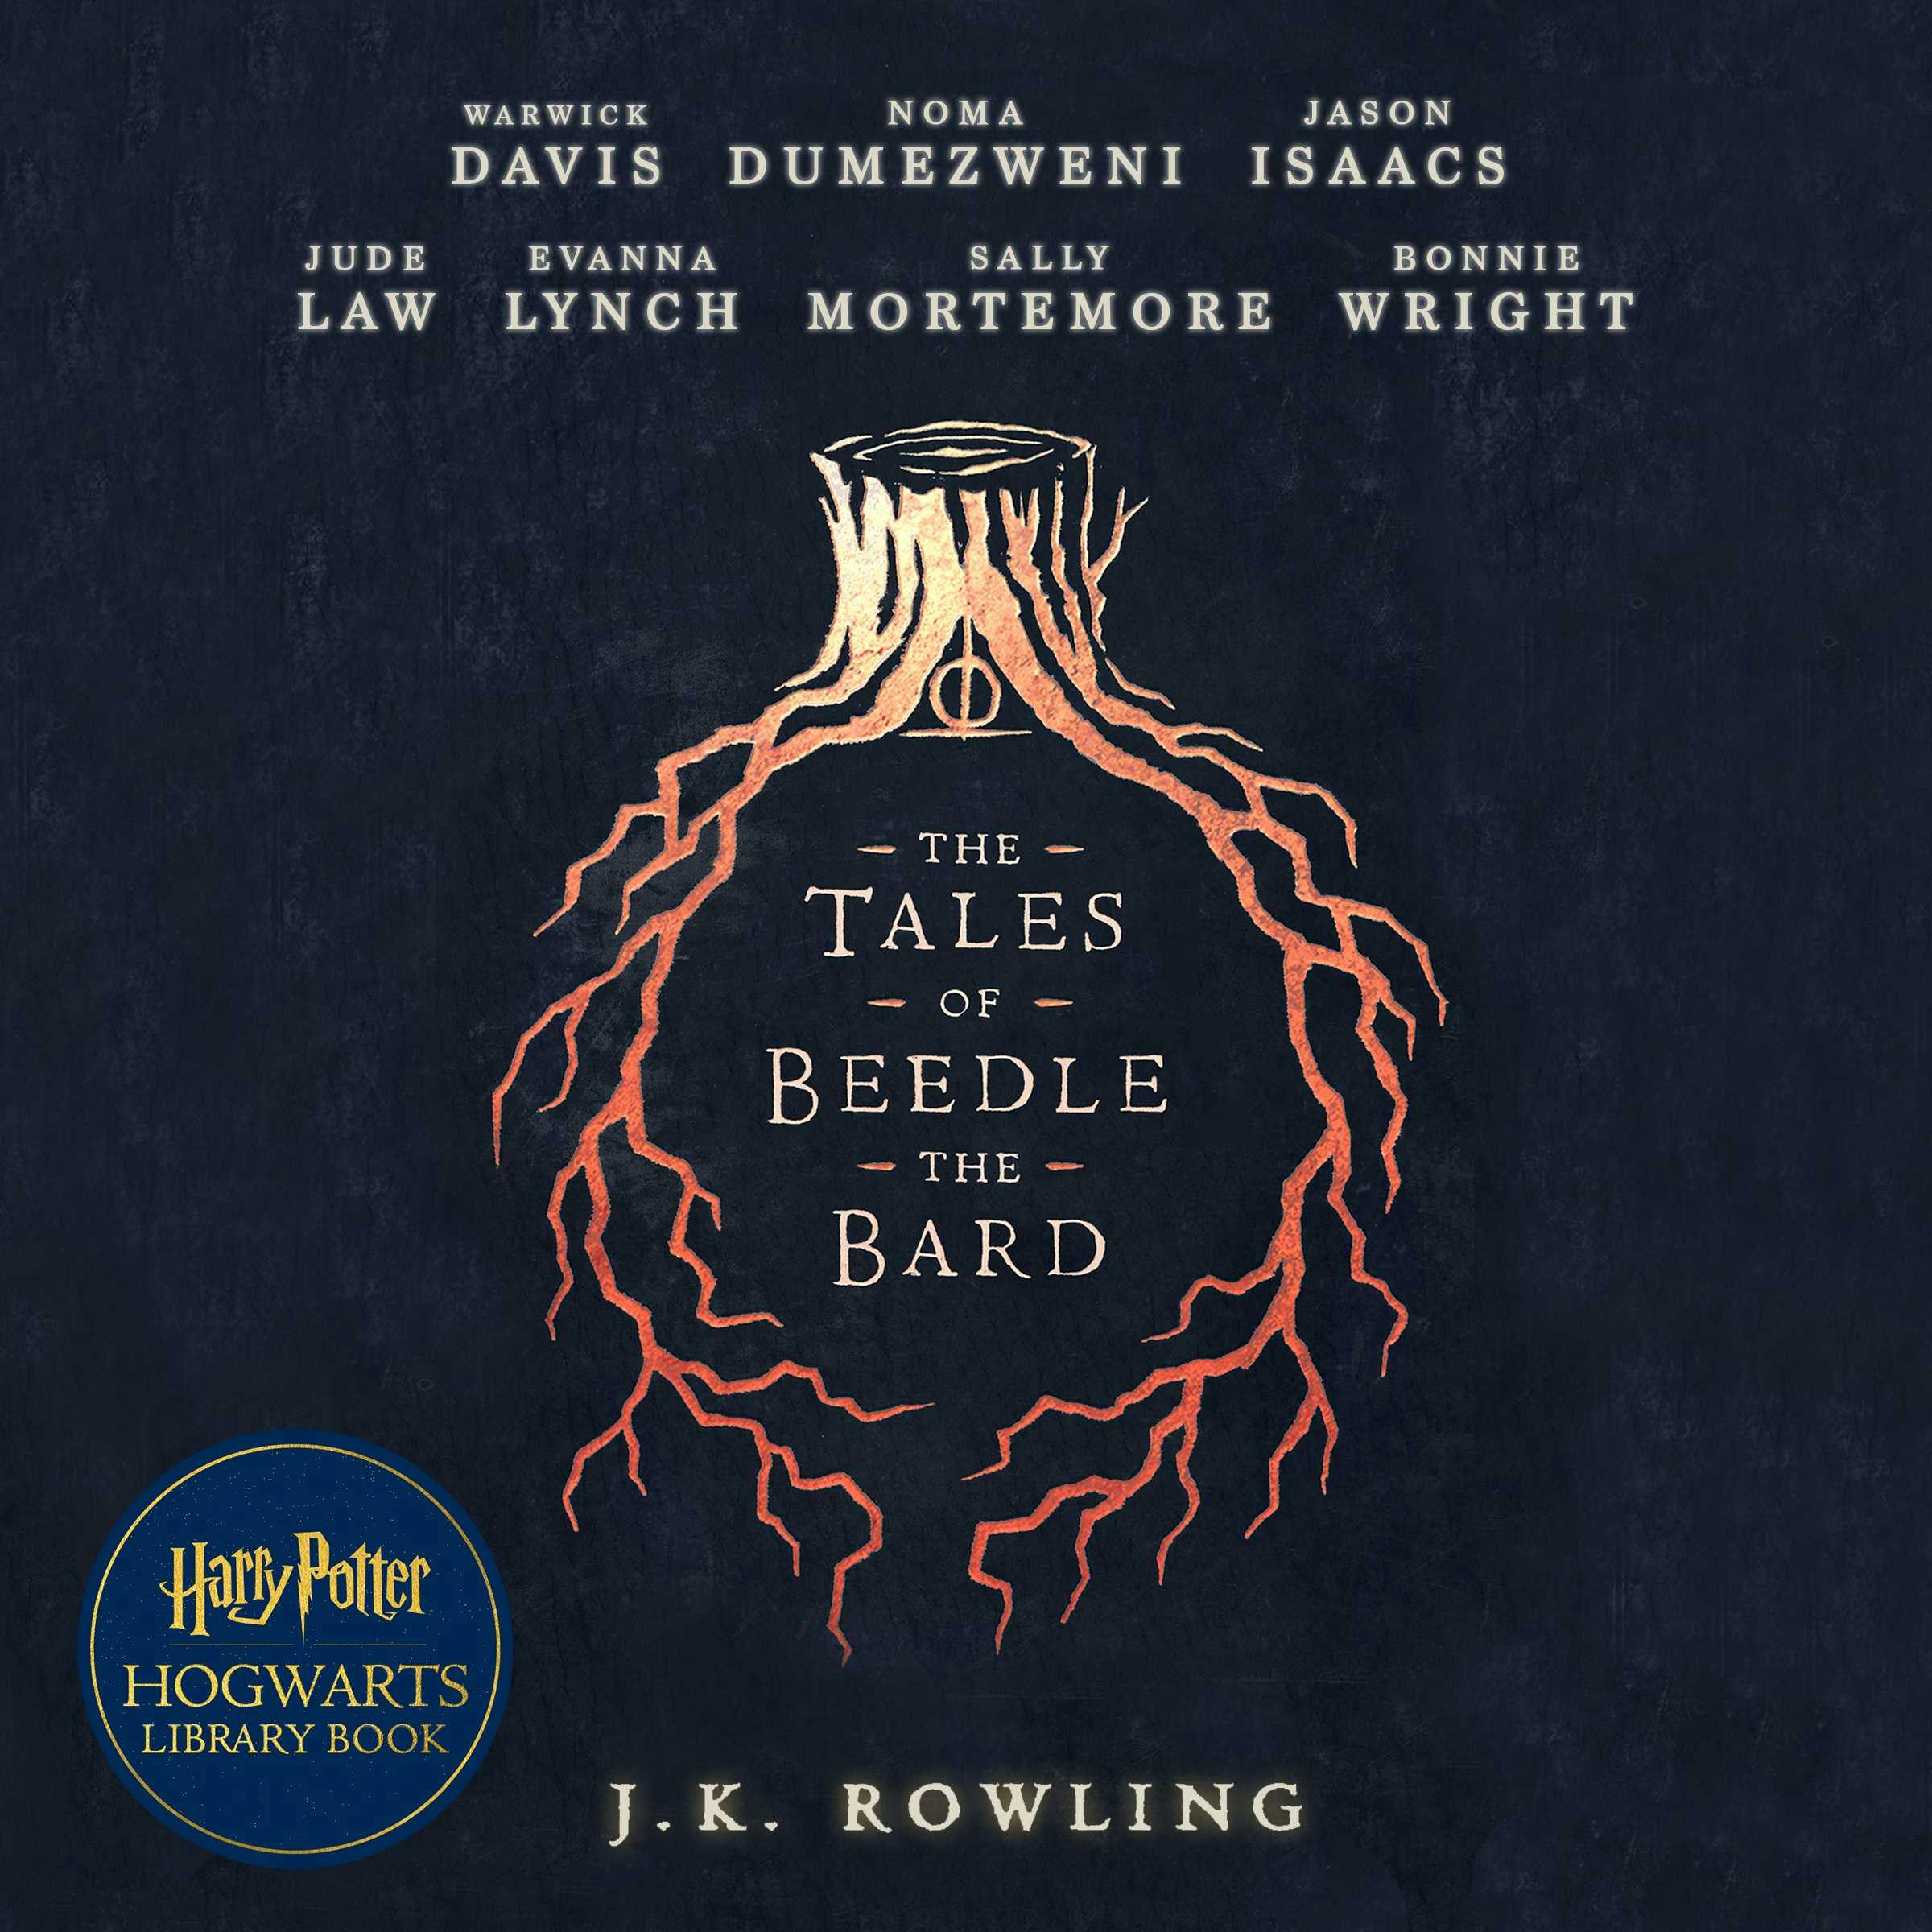 The Tales of Beedle the Bard: A Harry Potter Hogwarts Library Book - J.K. Rowling